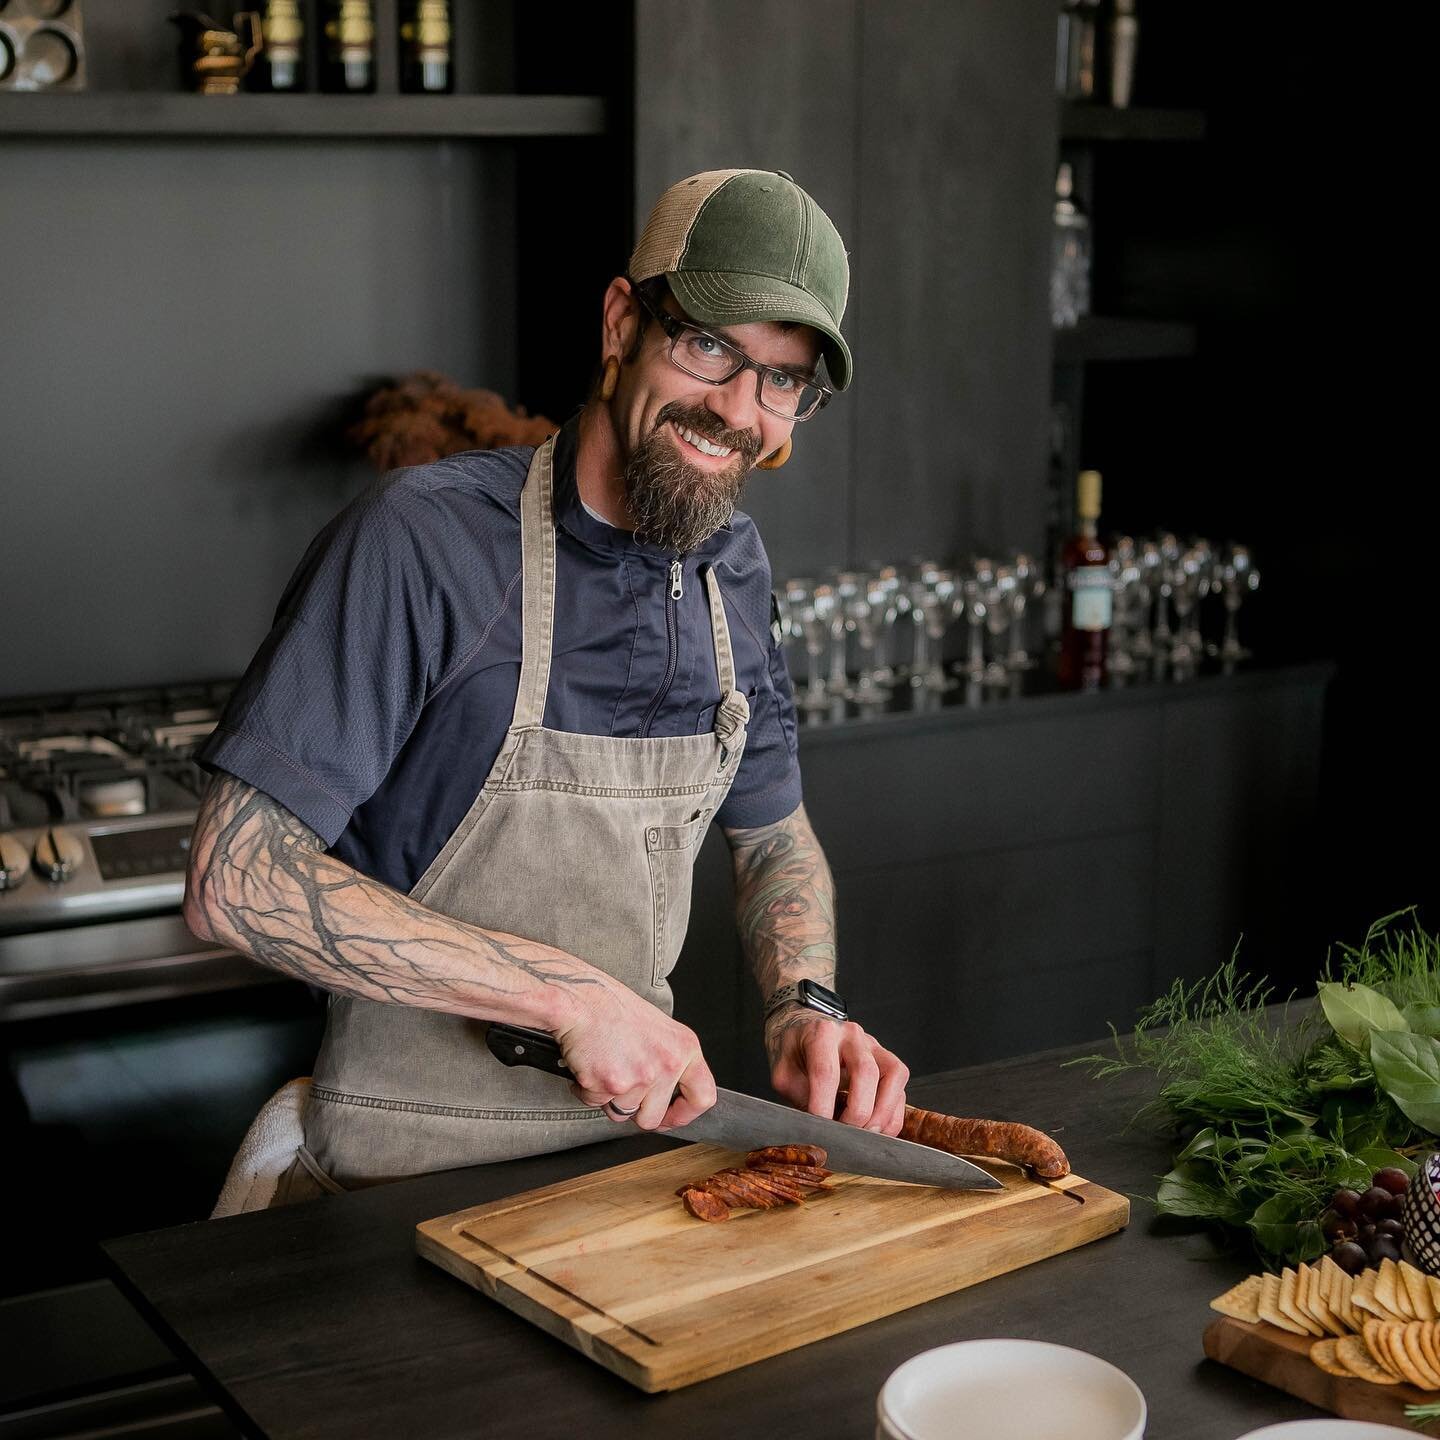 Executive Chef @hermannkev is in the running for Favorite Chef. Chef&rsquo;s driving force is the dream to open a farm to table farmers market to reinvigorate the farm sourcing in #pittsburgh and create new relationships. Winning this competition wil